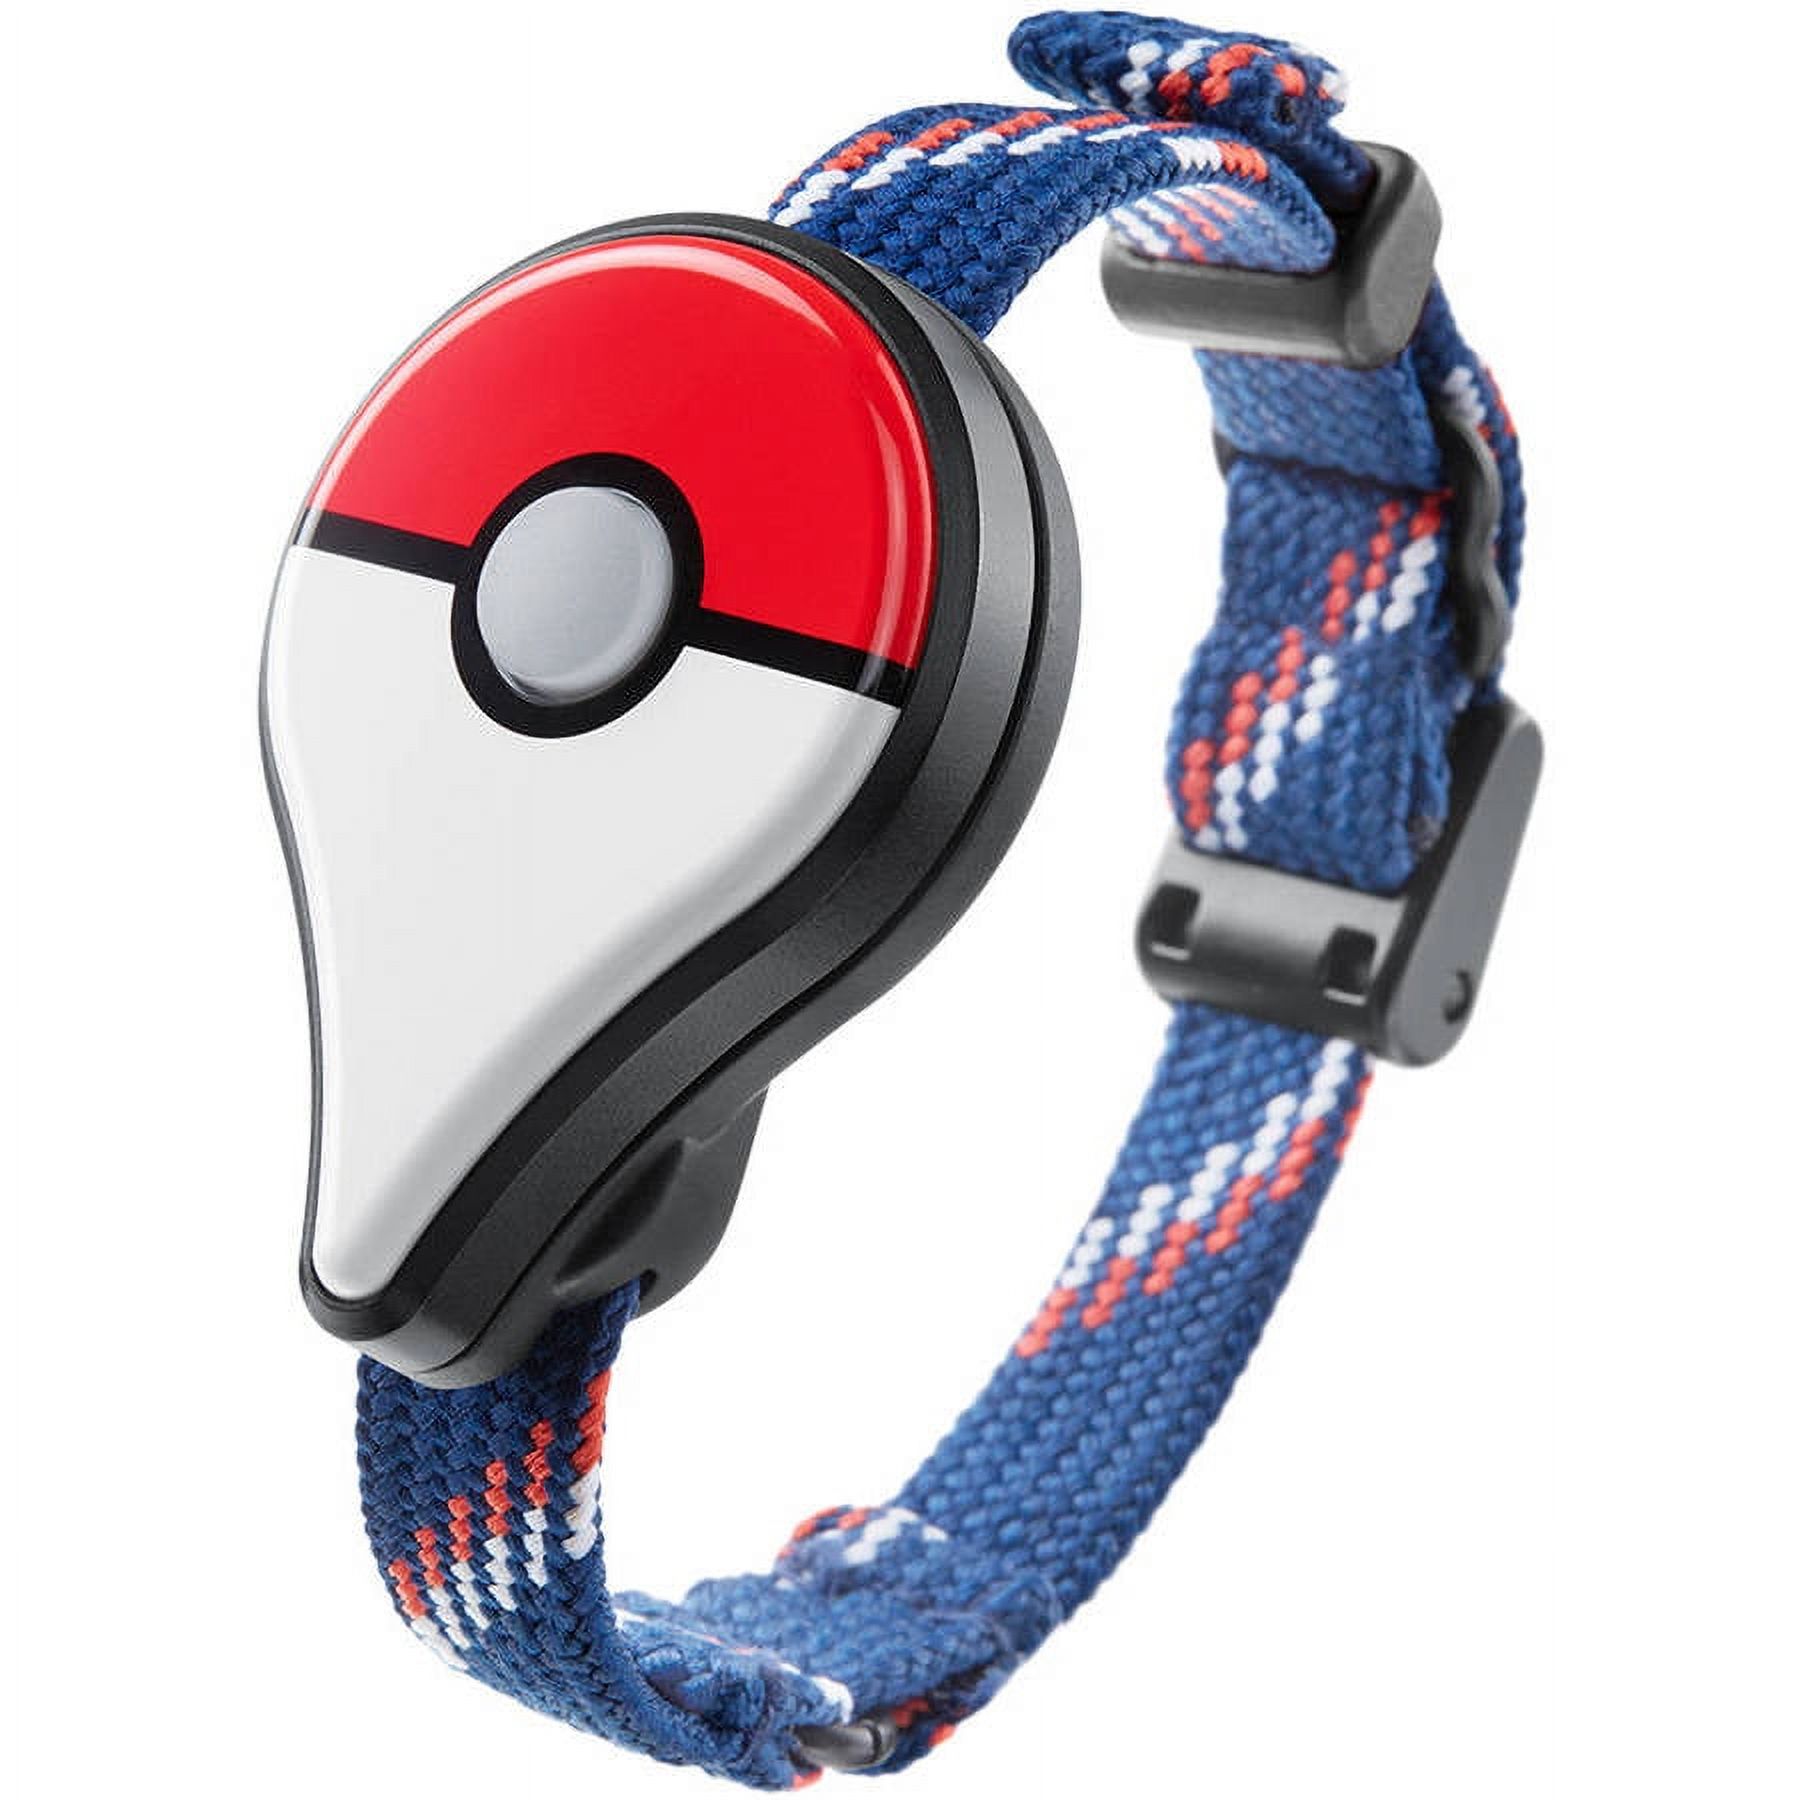 Pokemon GO Plus Accessory (Android & iOS Compatible) - image 1 of 6